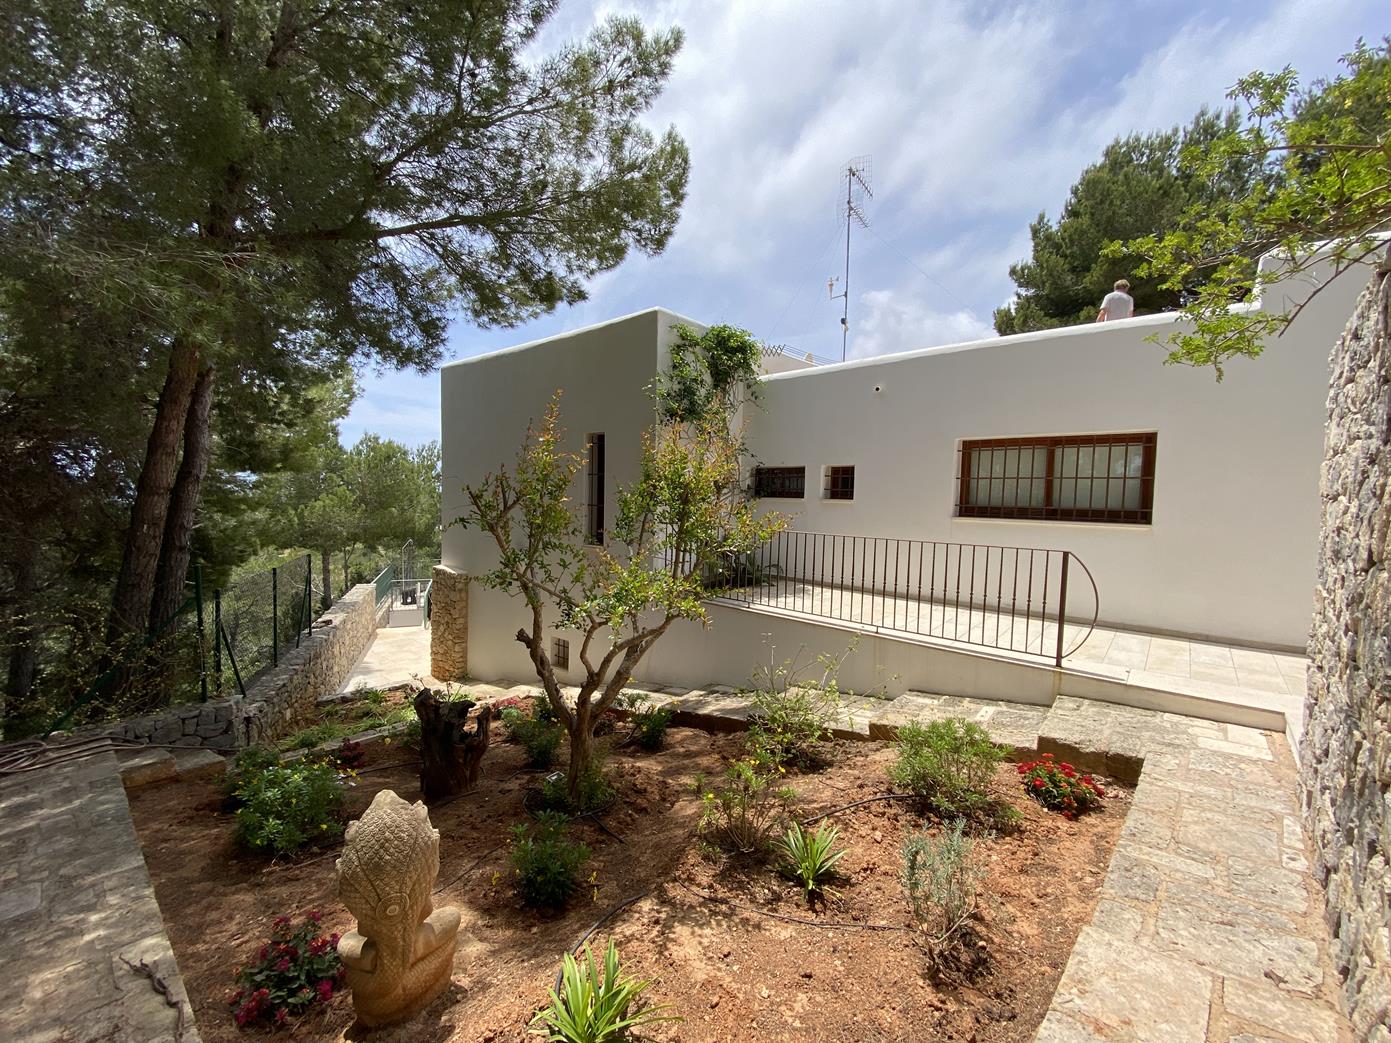 Villa with panoramic views of the Sea and Formentera